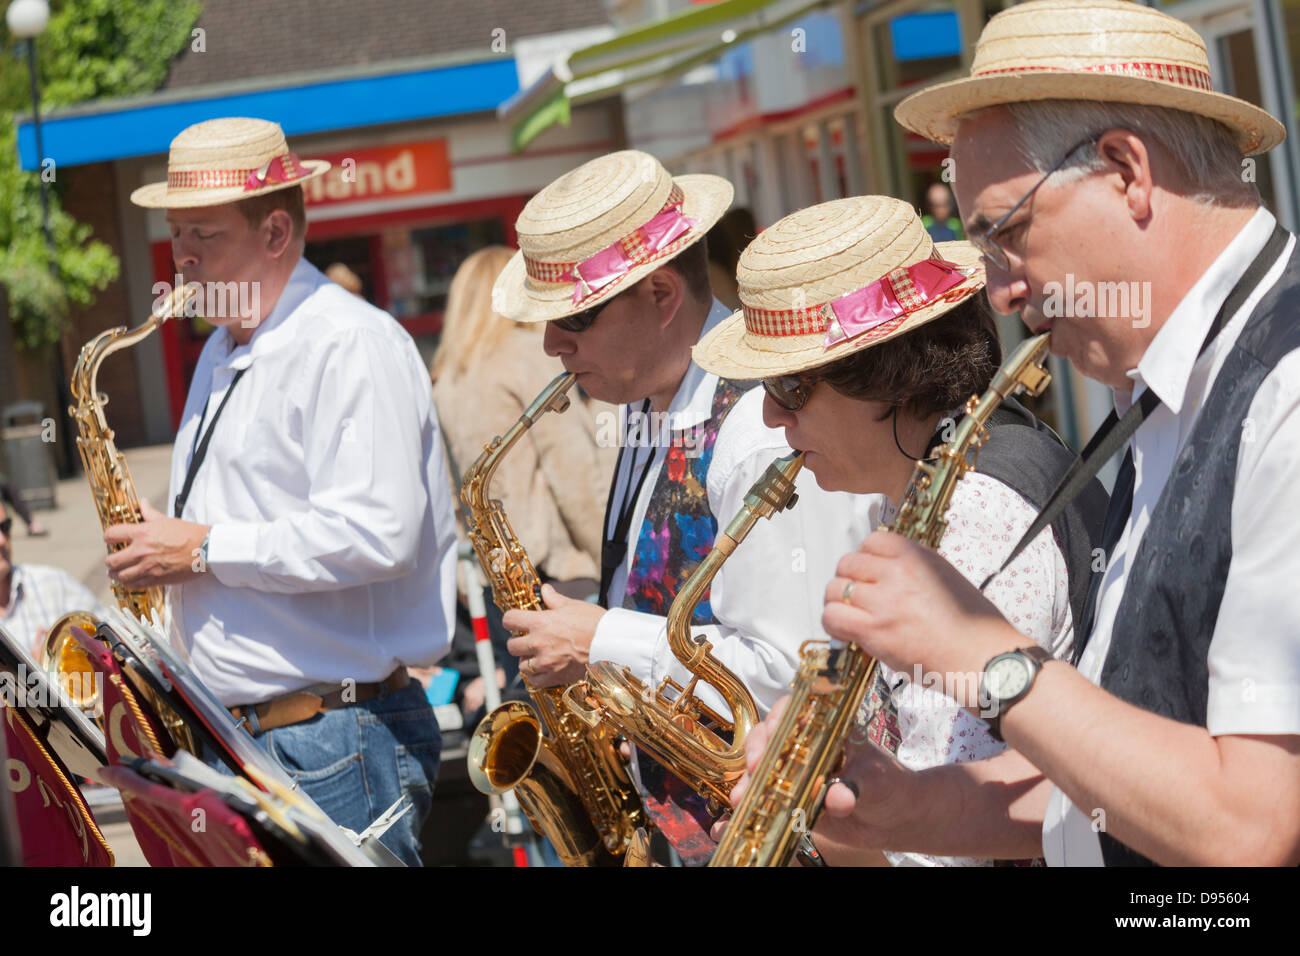 three male one female in pork pie hats playing tenor and baritone saxaphones and brass clarinet Stock Photo